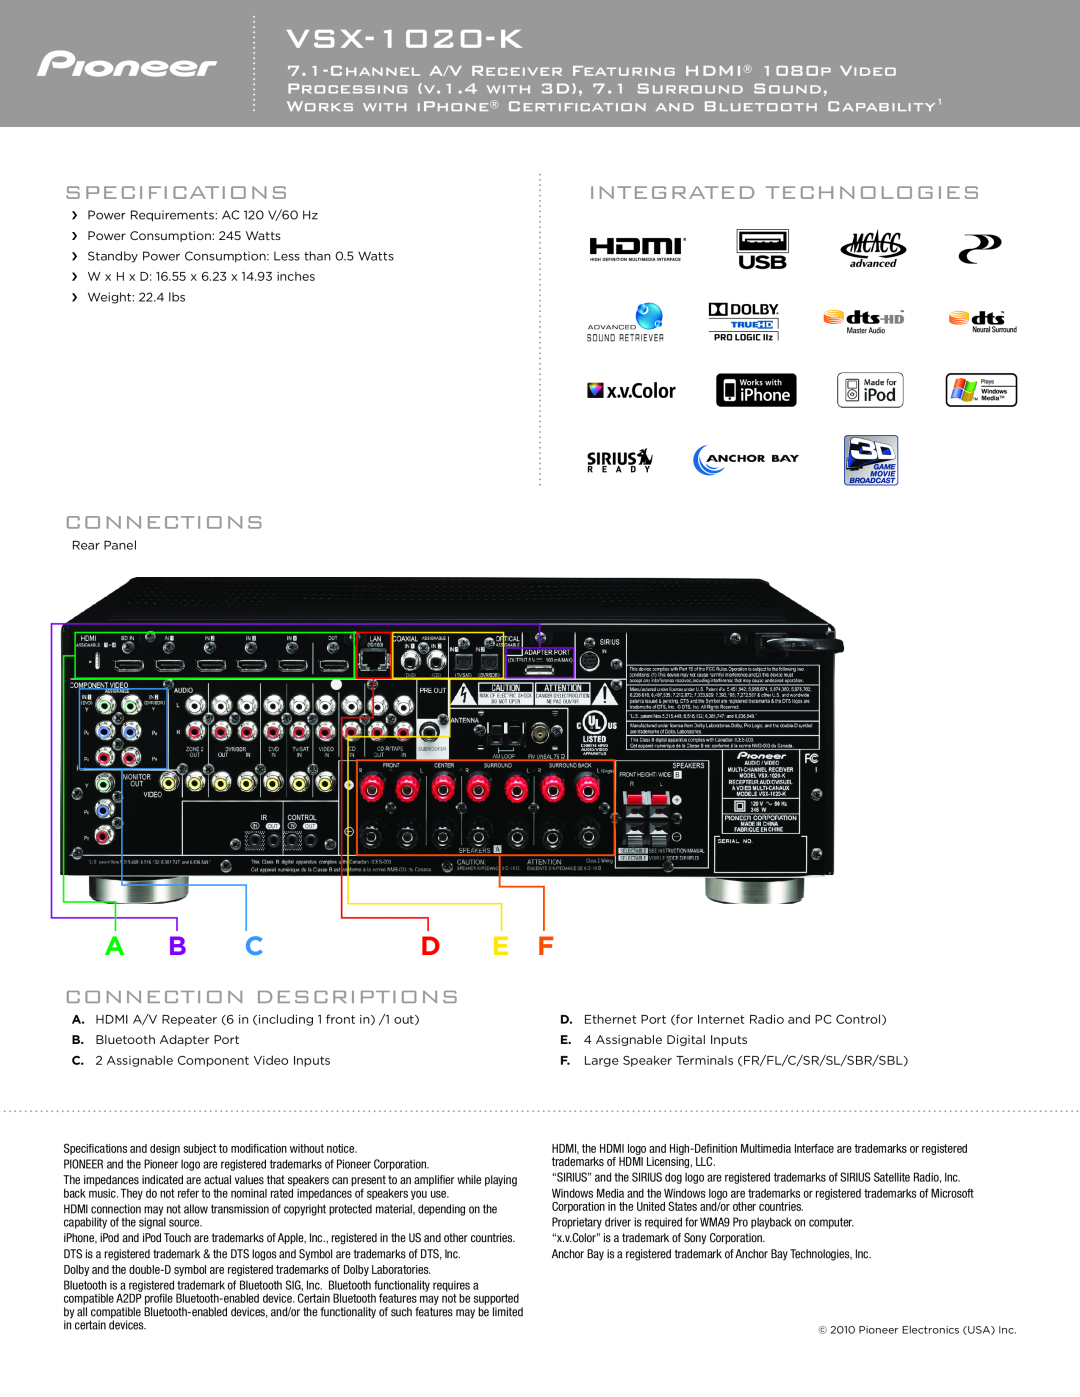 Pioneer VSX-1020-K manual Specifications, Integrated Technologies, Connections, Connection Descriptions, A B C D E F 